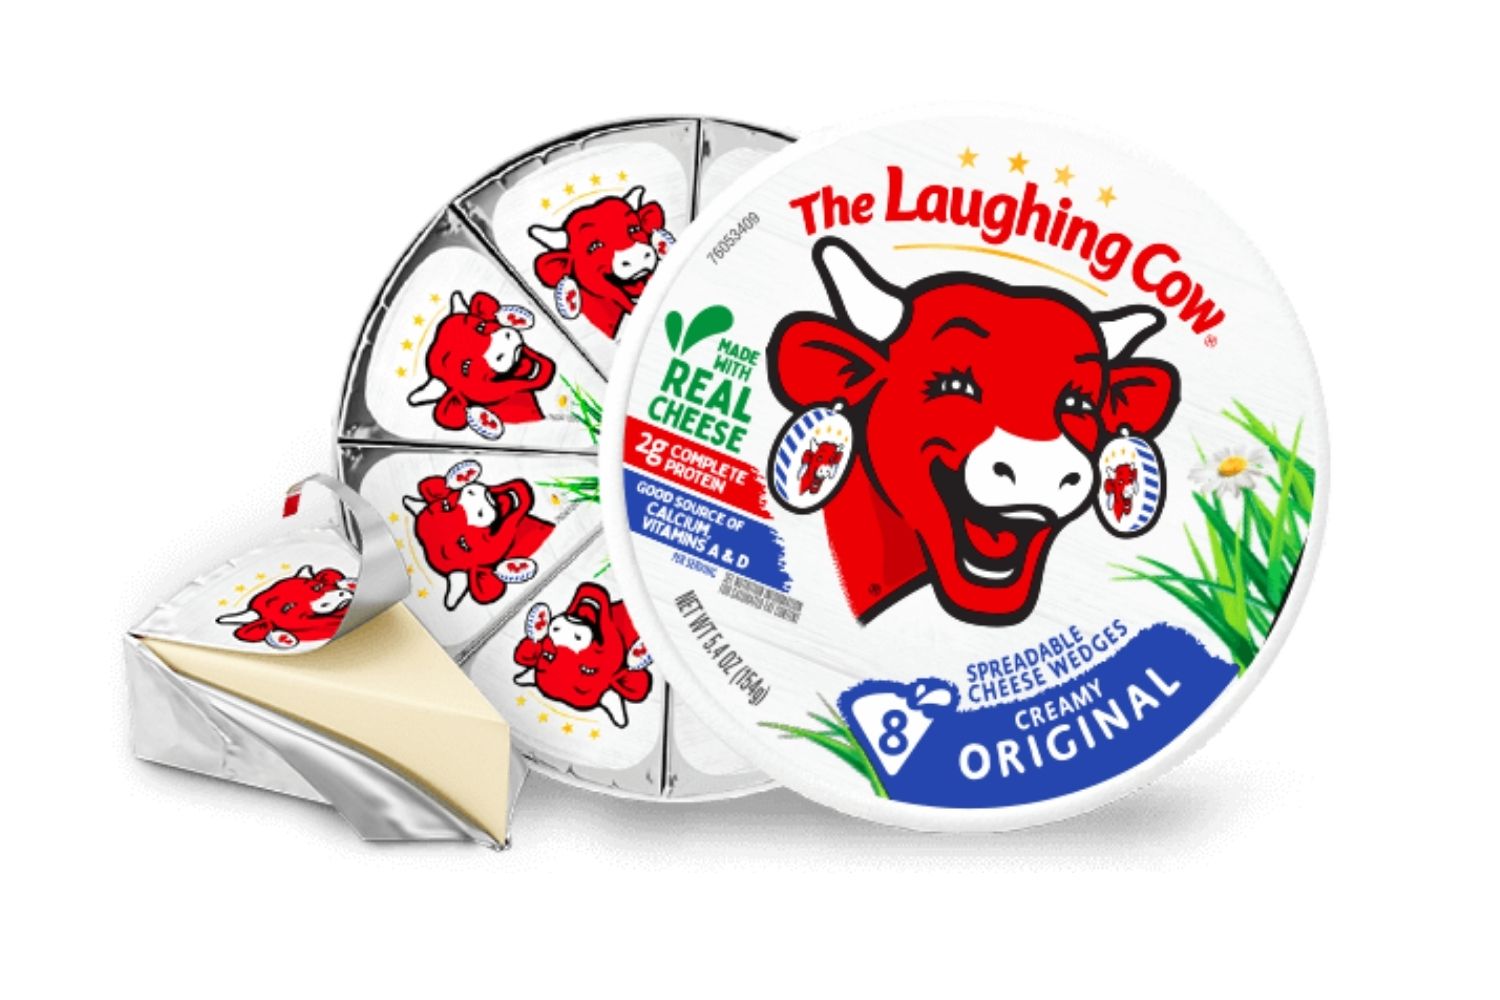 14-surprising-facts-about-laughing-cow-cheese